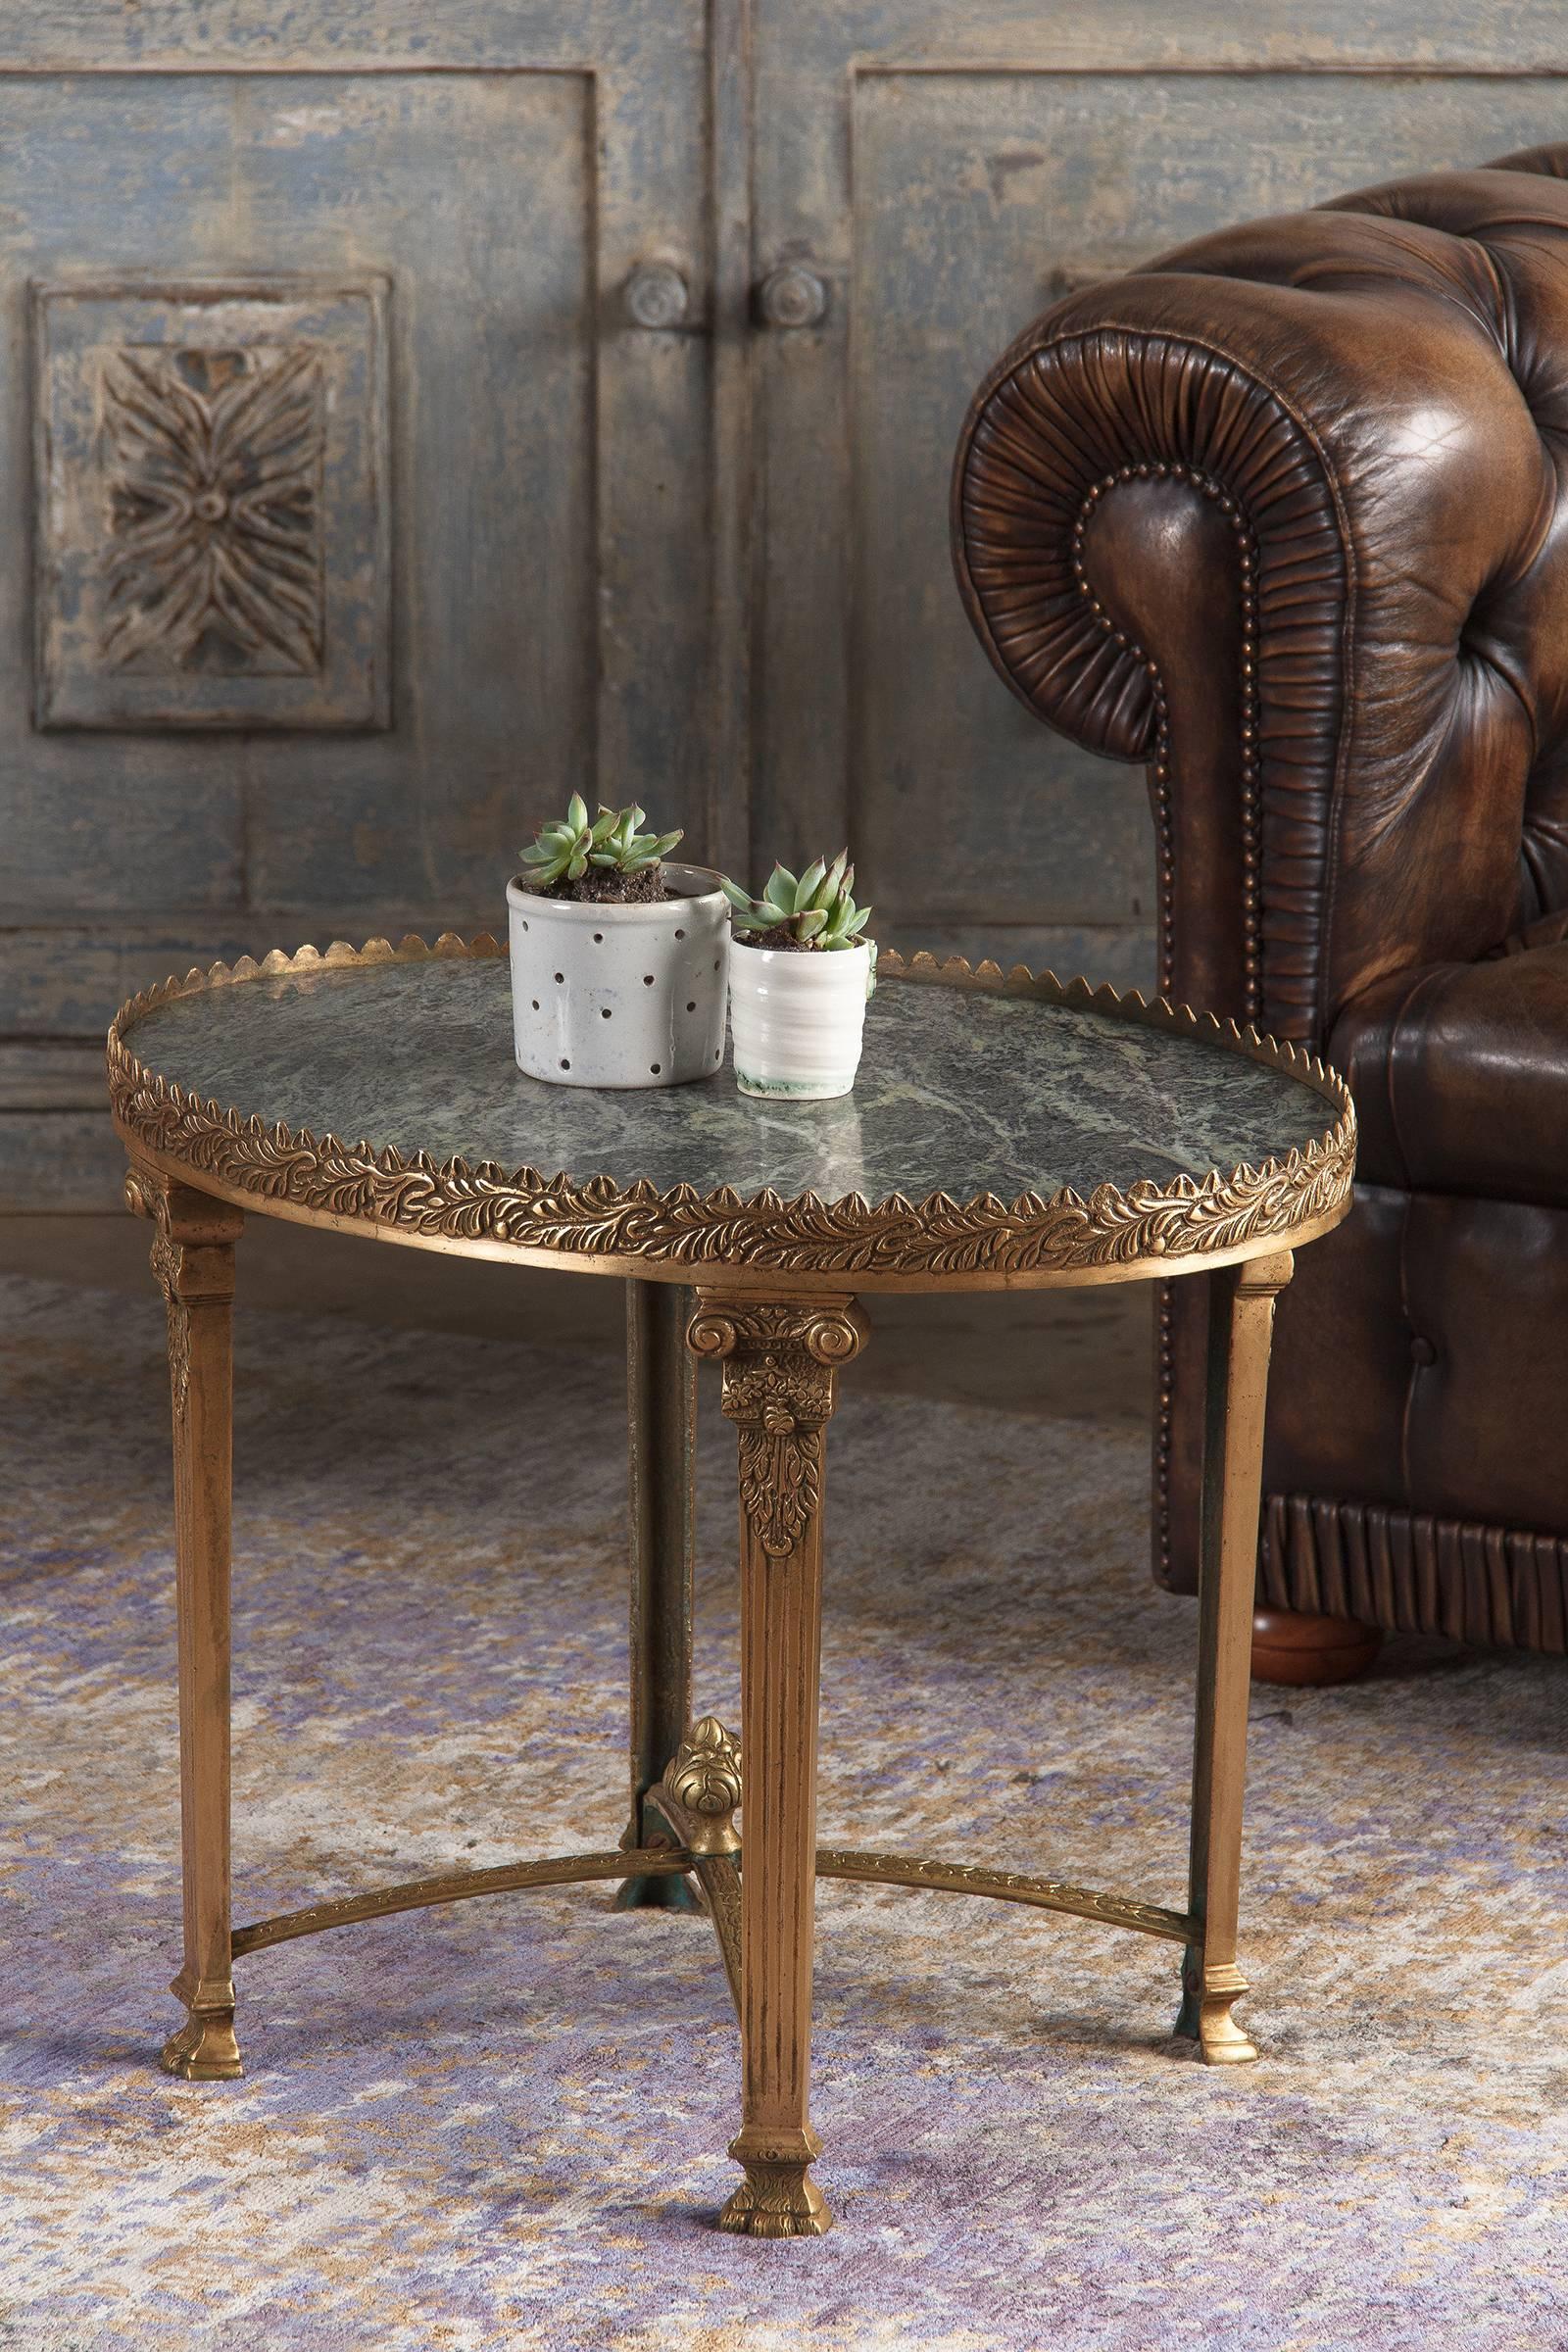 Vintage gilt bronze marble-top side table in the Empire style, circa 1950. An ornate gilded bronze base with a peaked, heavily foliate gallery and fluted Corinthian column legs culminating in clawed feet. The cruciform stretcher is graced with water